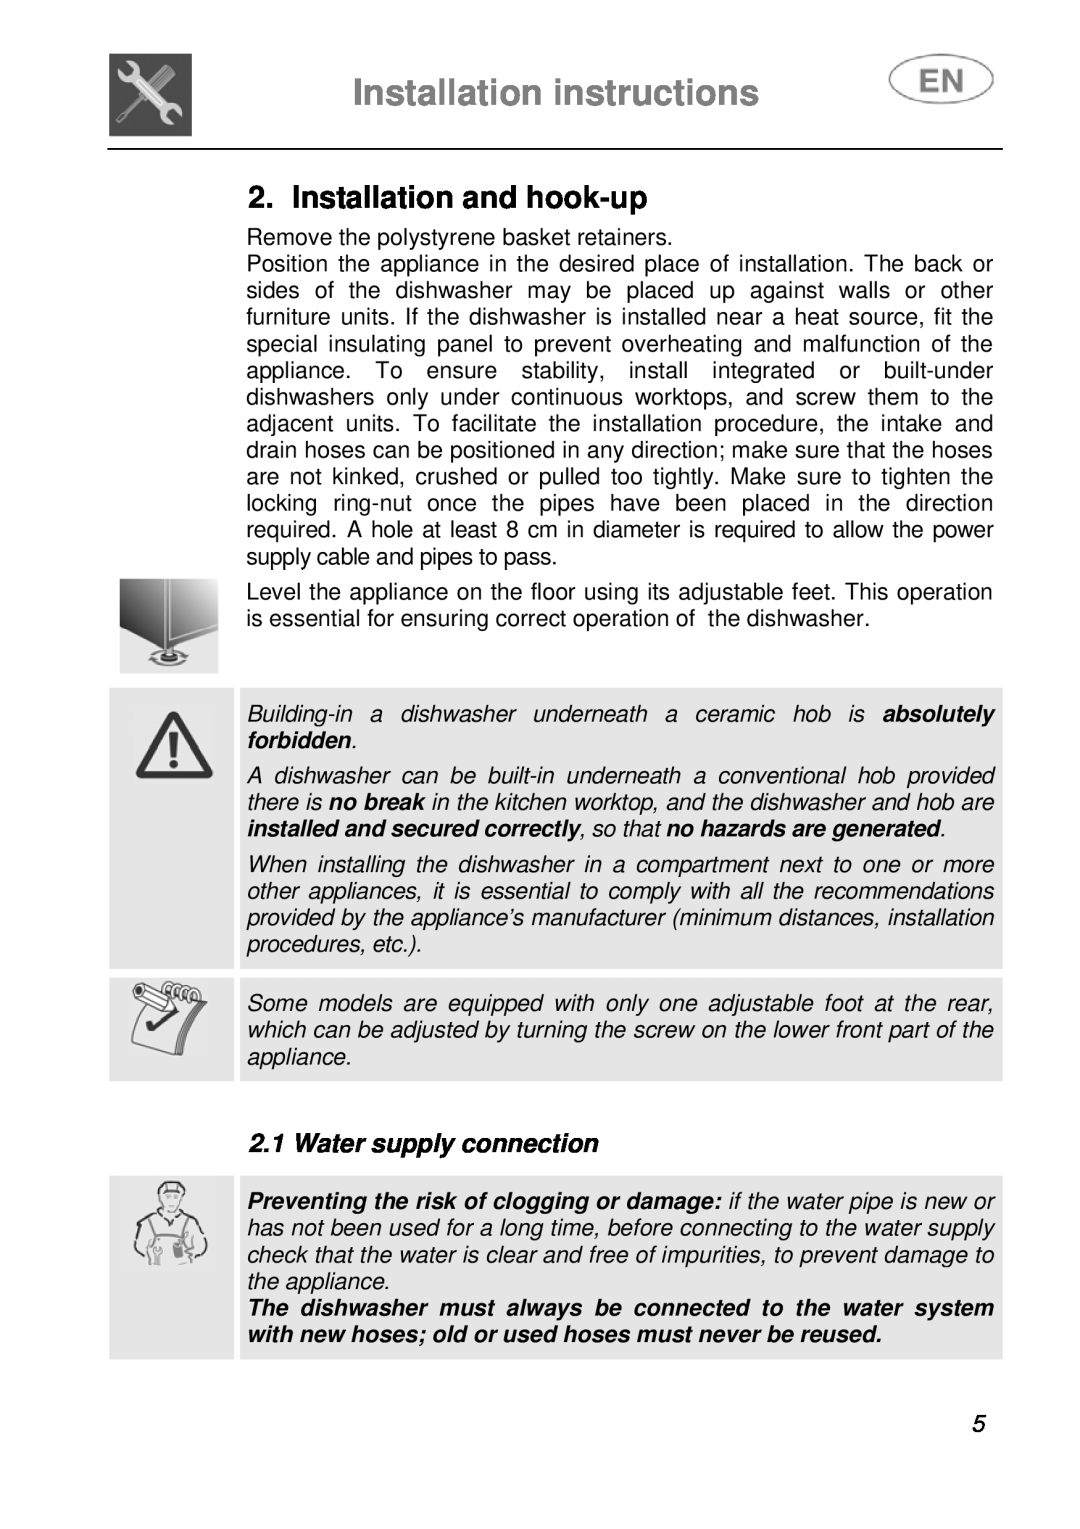 Smeg KLS55B instruction manual Installation instructions, Installation and hook-up, Water supply connection 